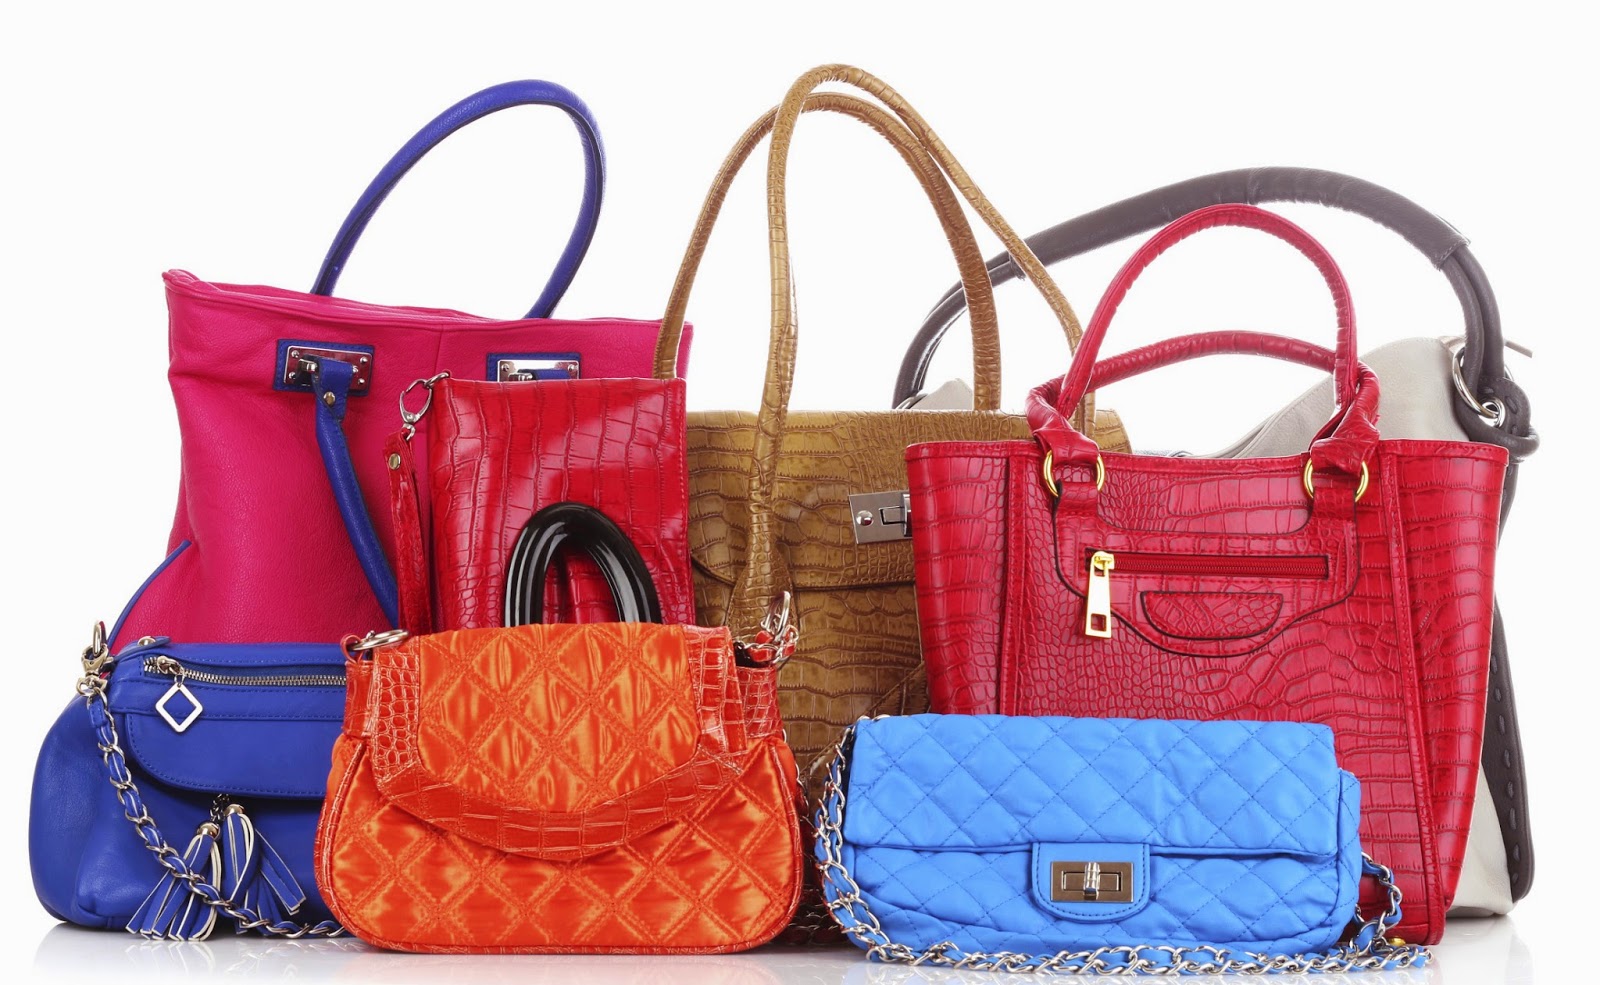 Are Your Inexpensive Designer Handbags the Real Deal? ~ Beautifully Cheap Fashions